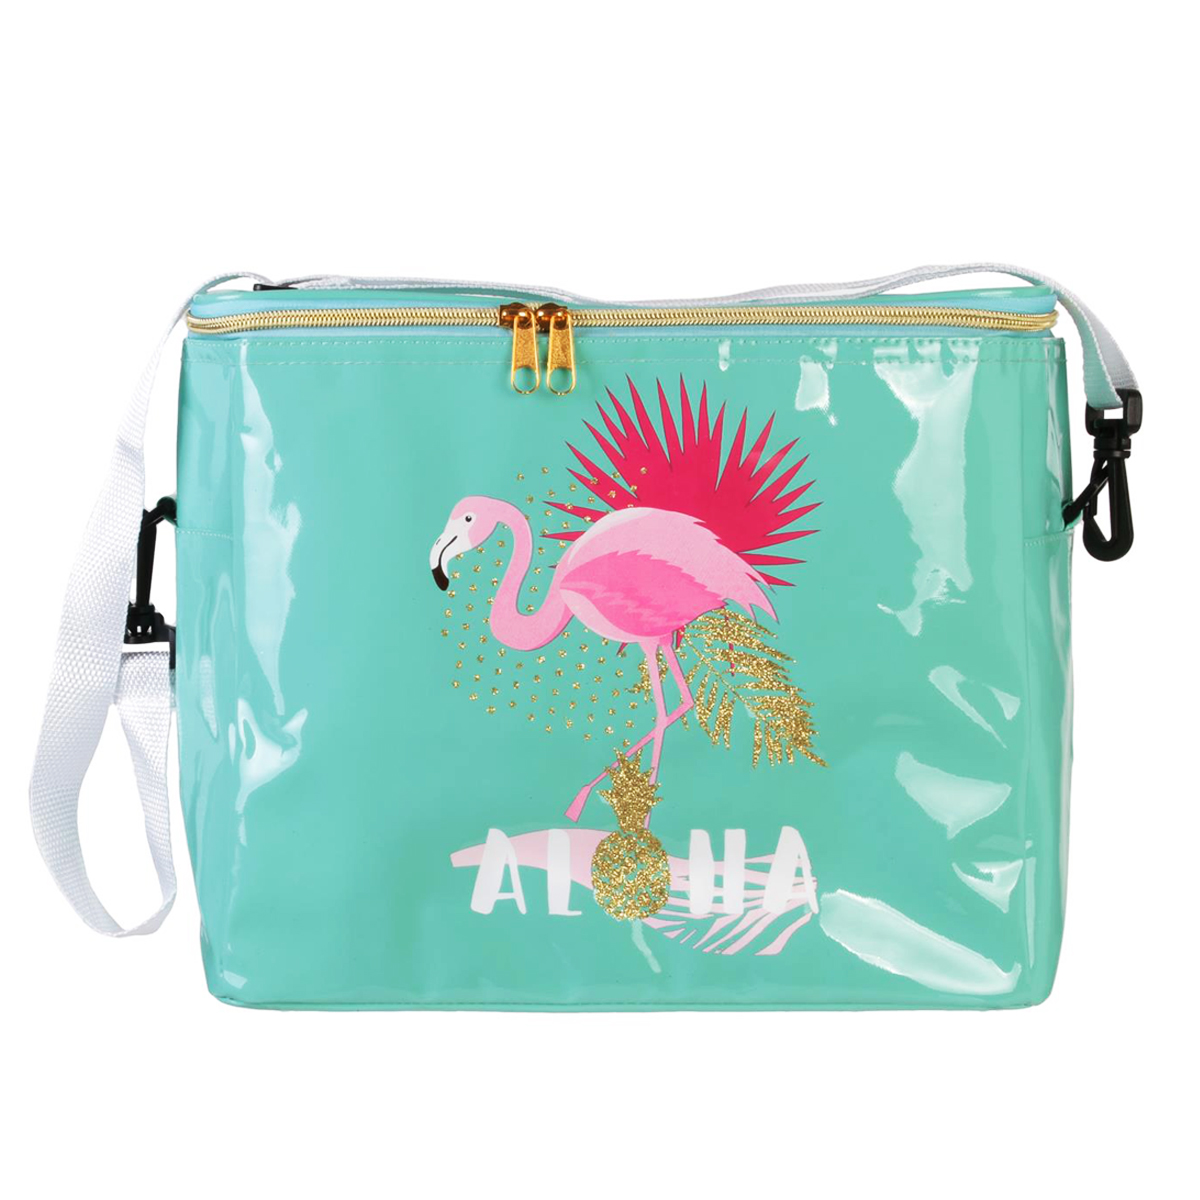 Sac isotherme \'Tropical\' turquoise (flamant rose) - 30x27x17 cm (135L) - [Q8111]